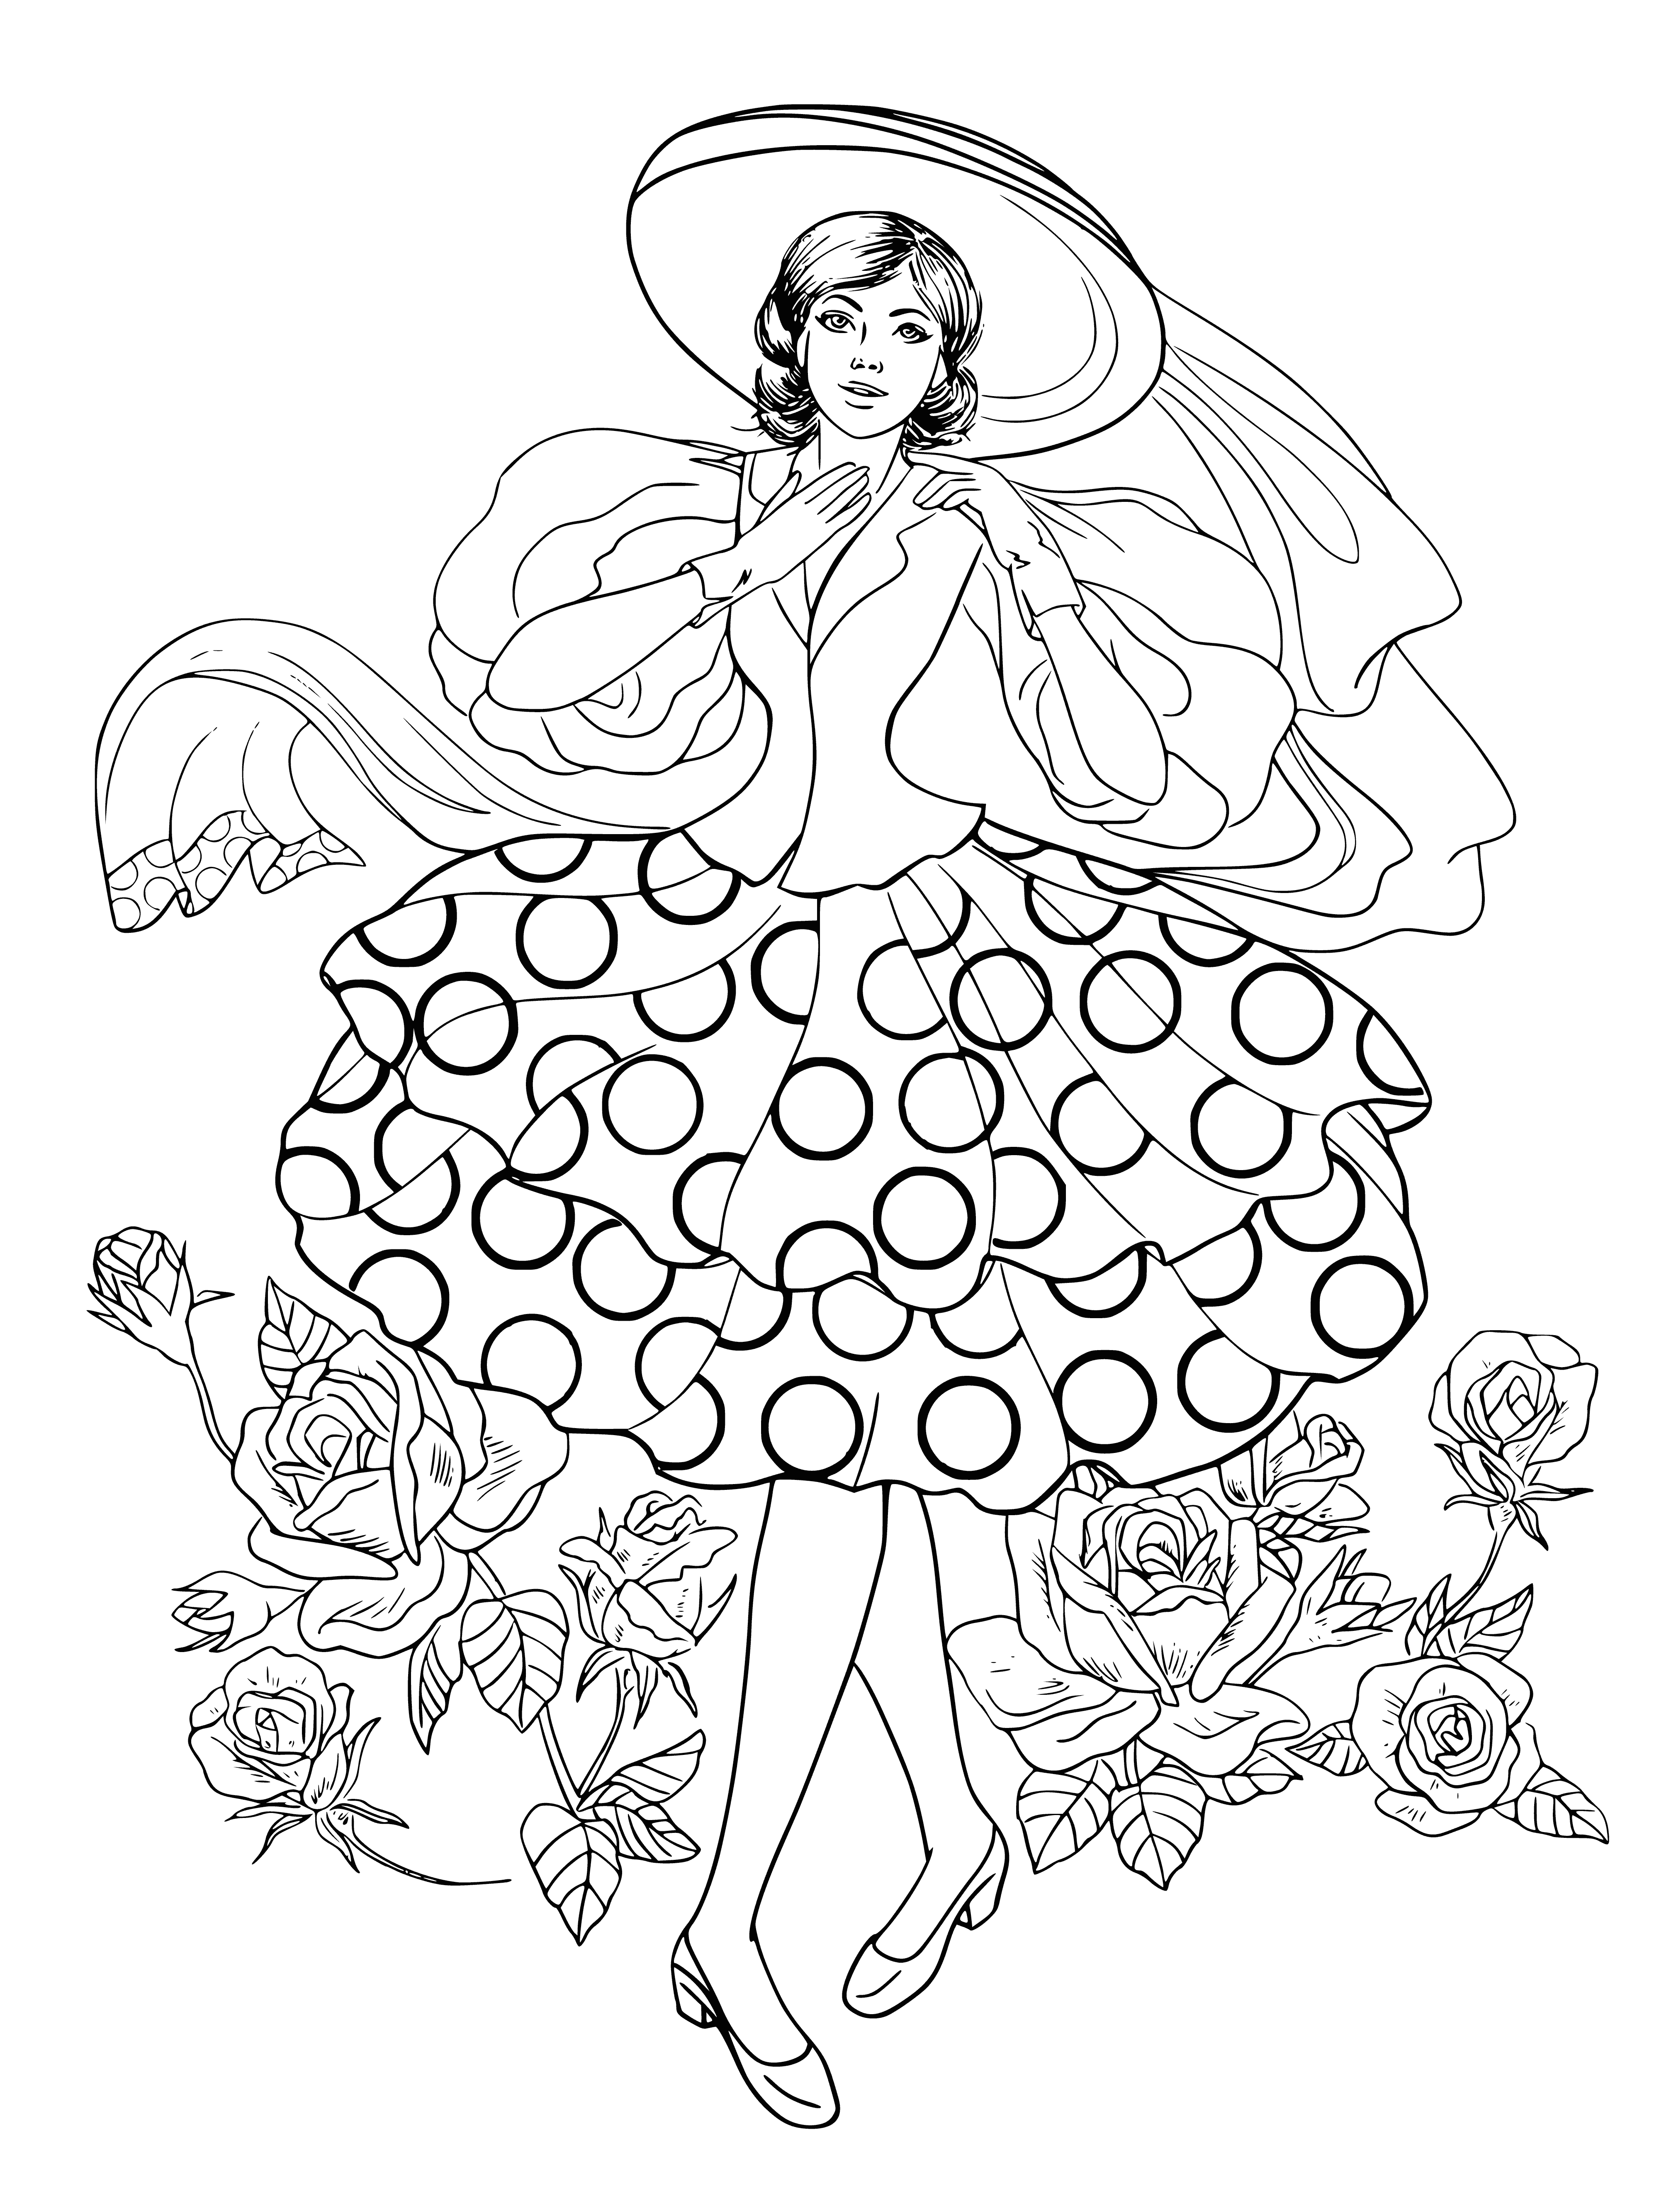 coloring page: Beautiful woman stands in a garden, holding a book and flowers, with butterflies and nature around her, in a backdrop of swirls and patterns.